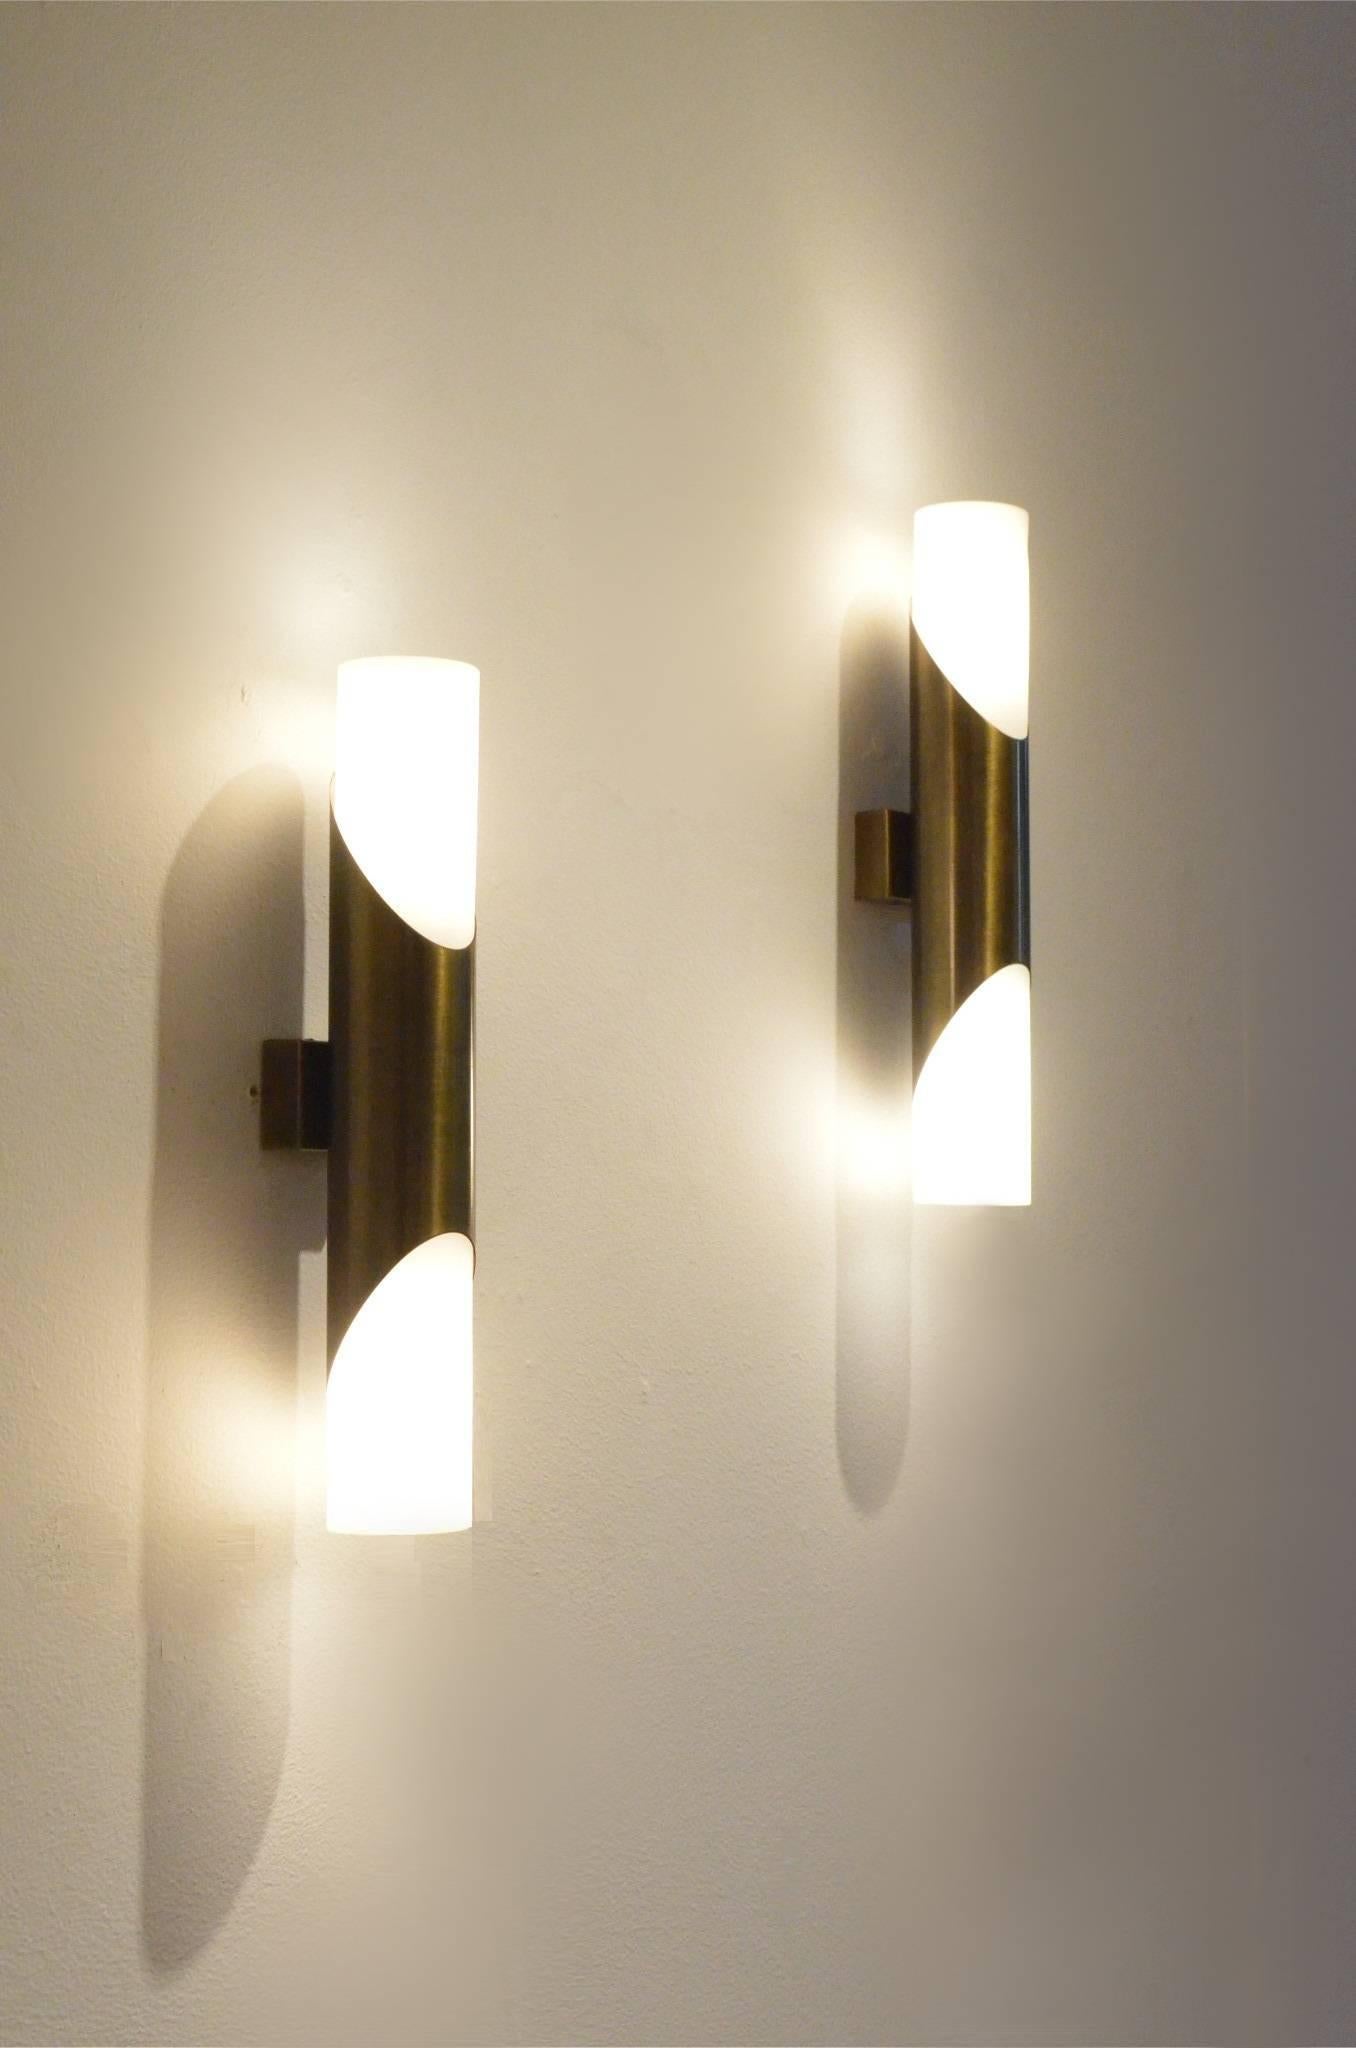 Late 20th Century 1970s German Vintage Design, Brass and Glass Neuhaus Wall Sconces Lamps